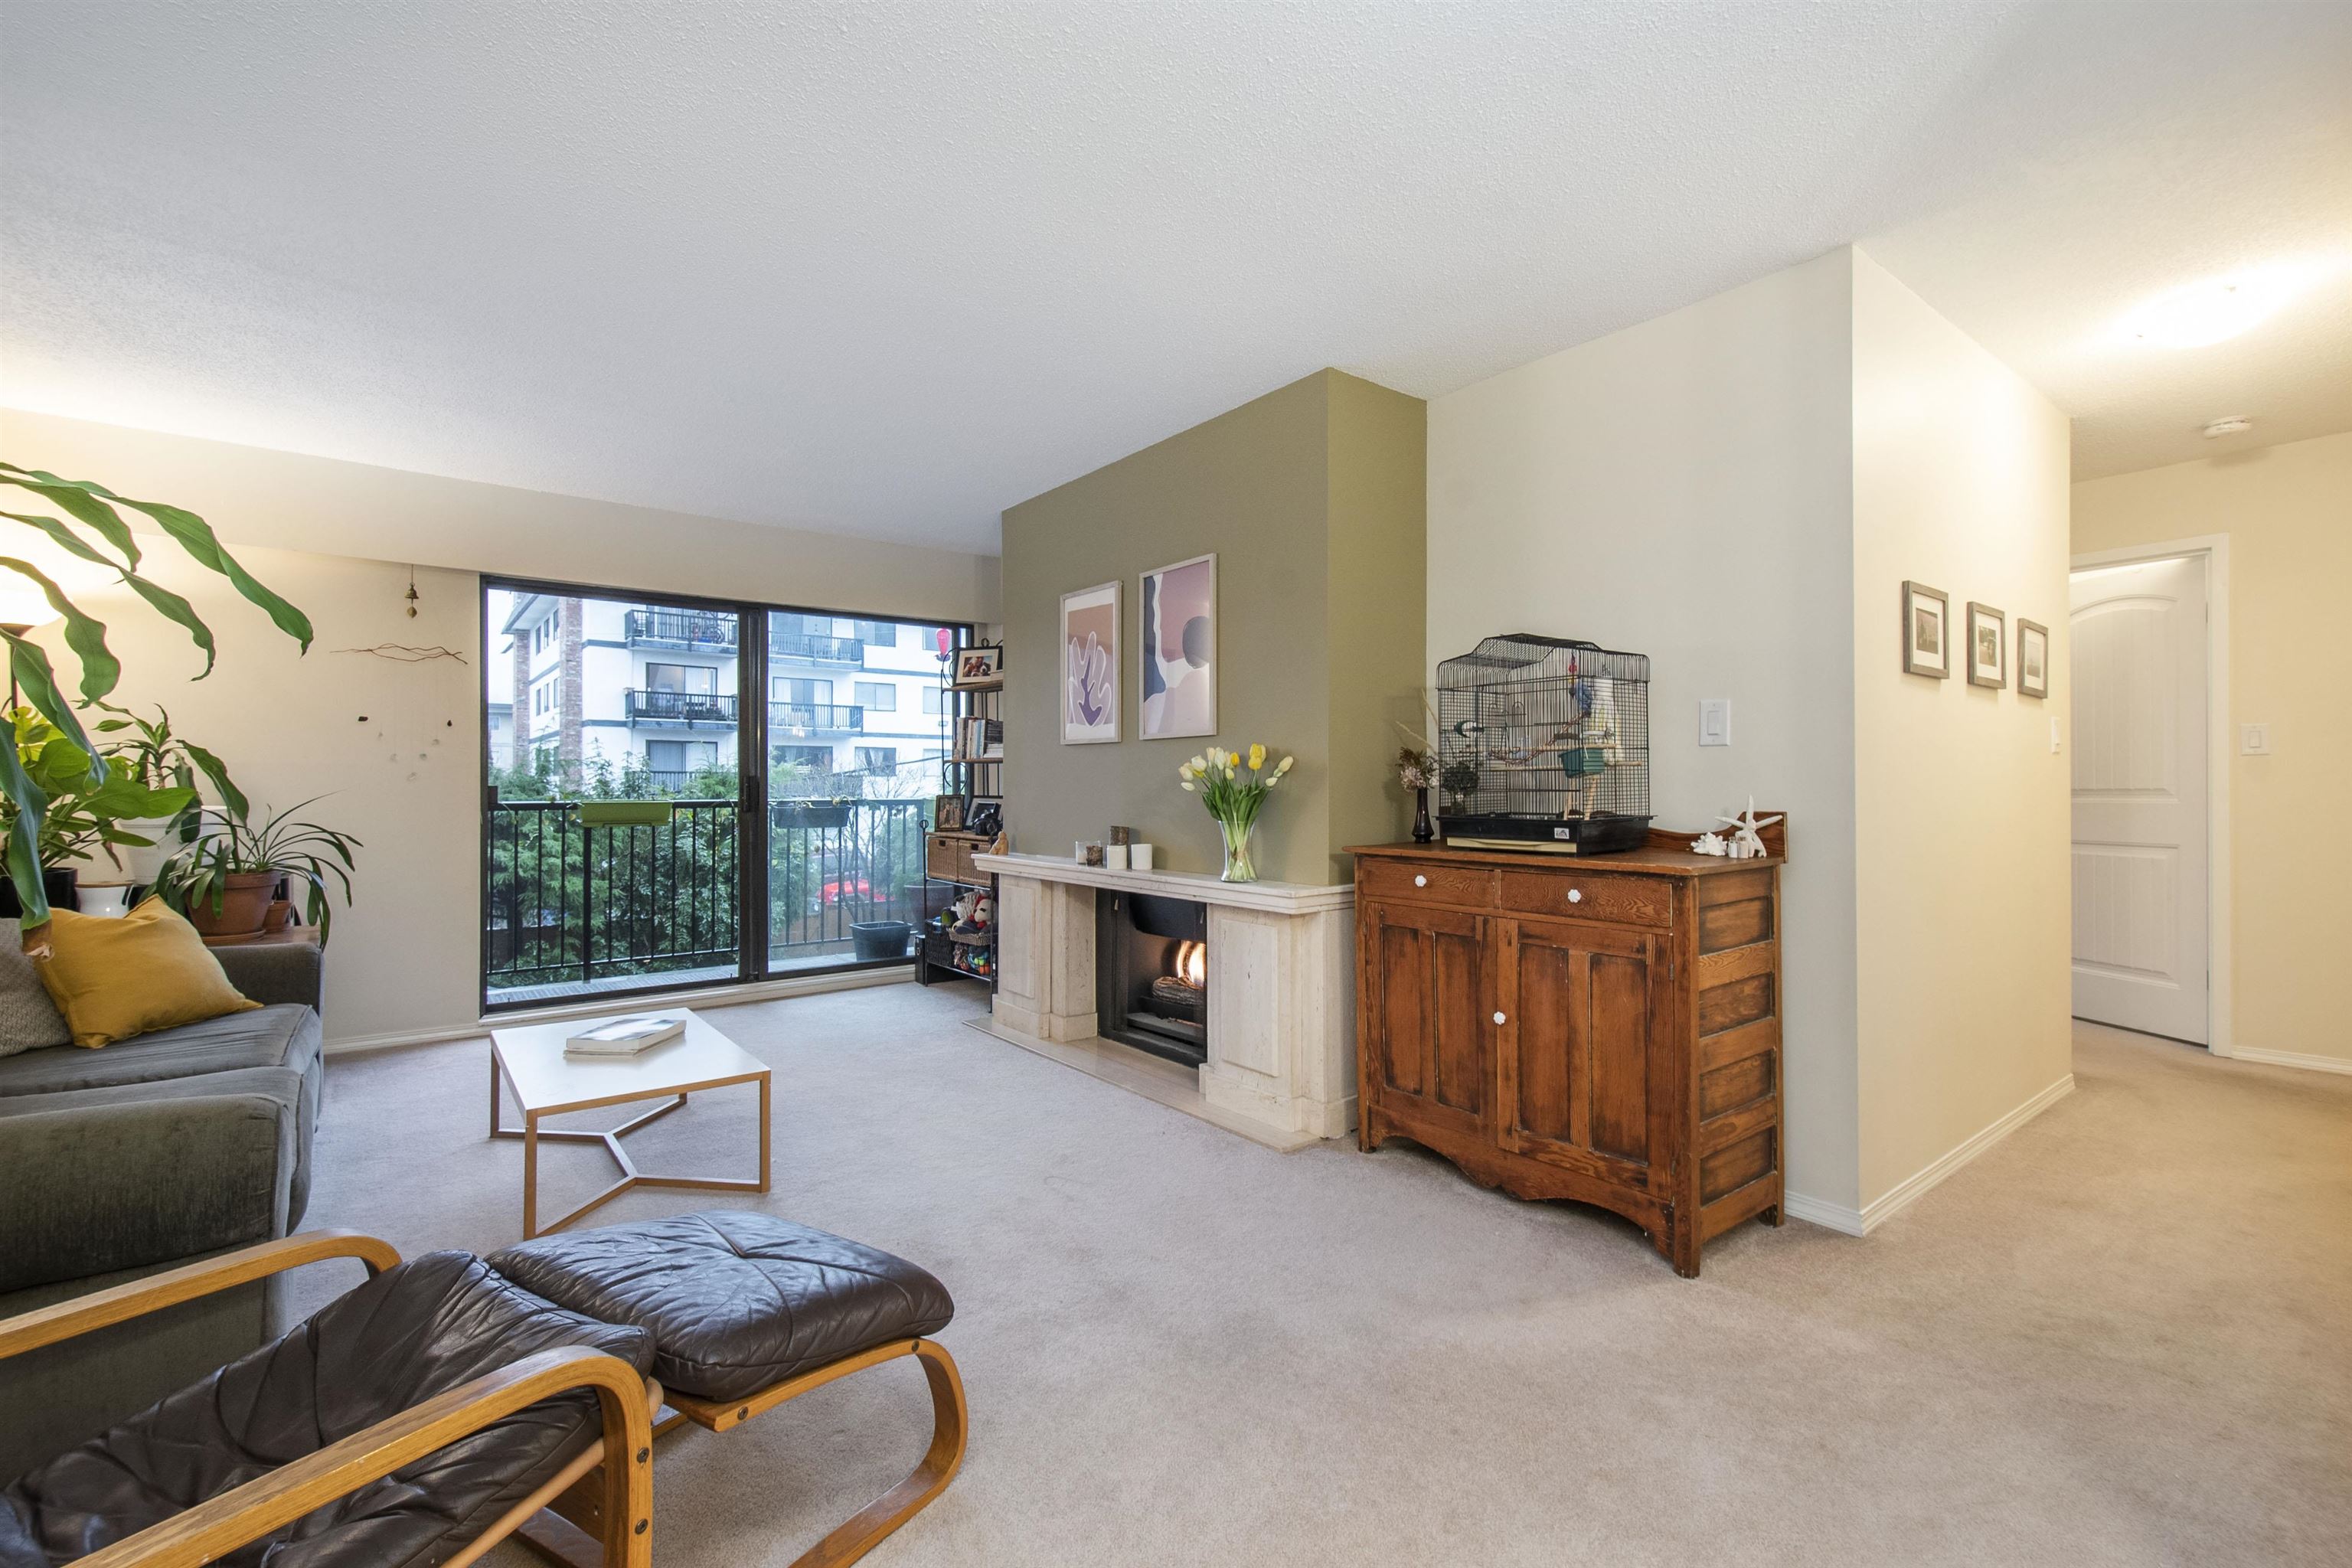 Central Lonsdale Apartment/Condo for sale:  2 bedroom 1,003 sq.ft. (Listed 6400-04-28)